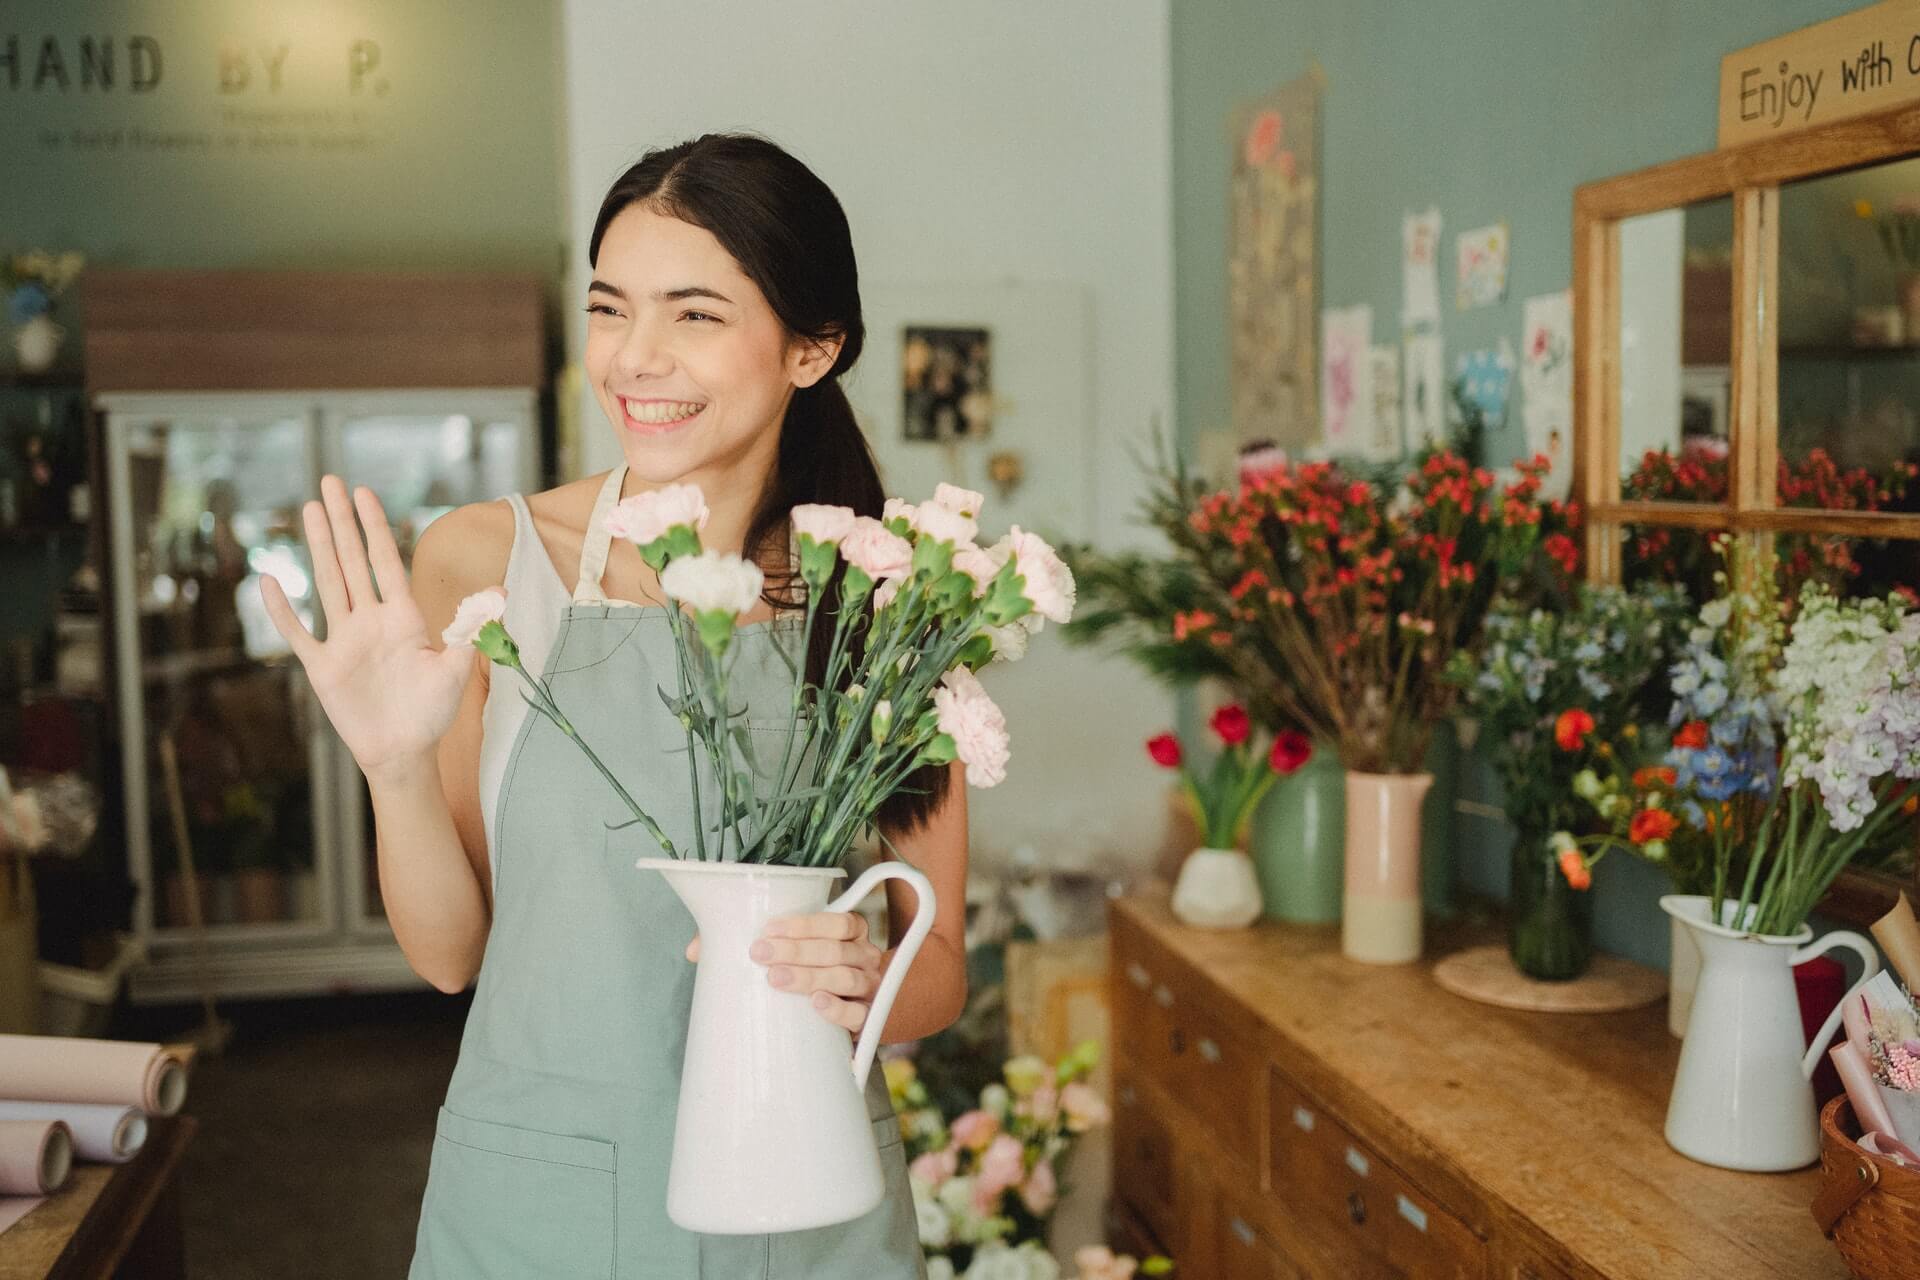 Florist holding a vase of flowers and learning how to say hello in Spanish